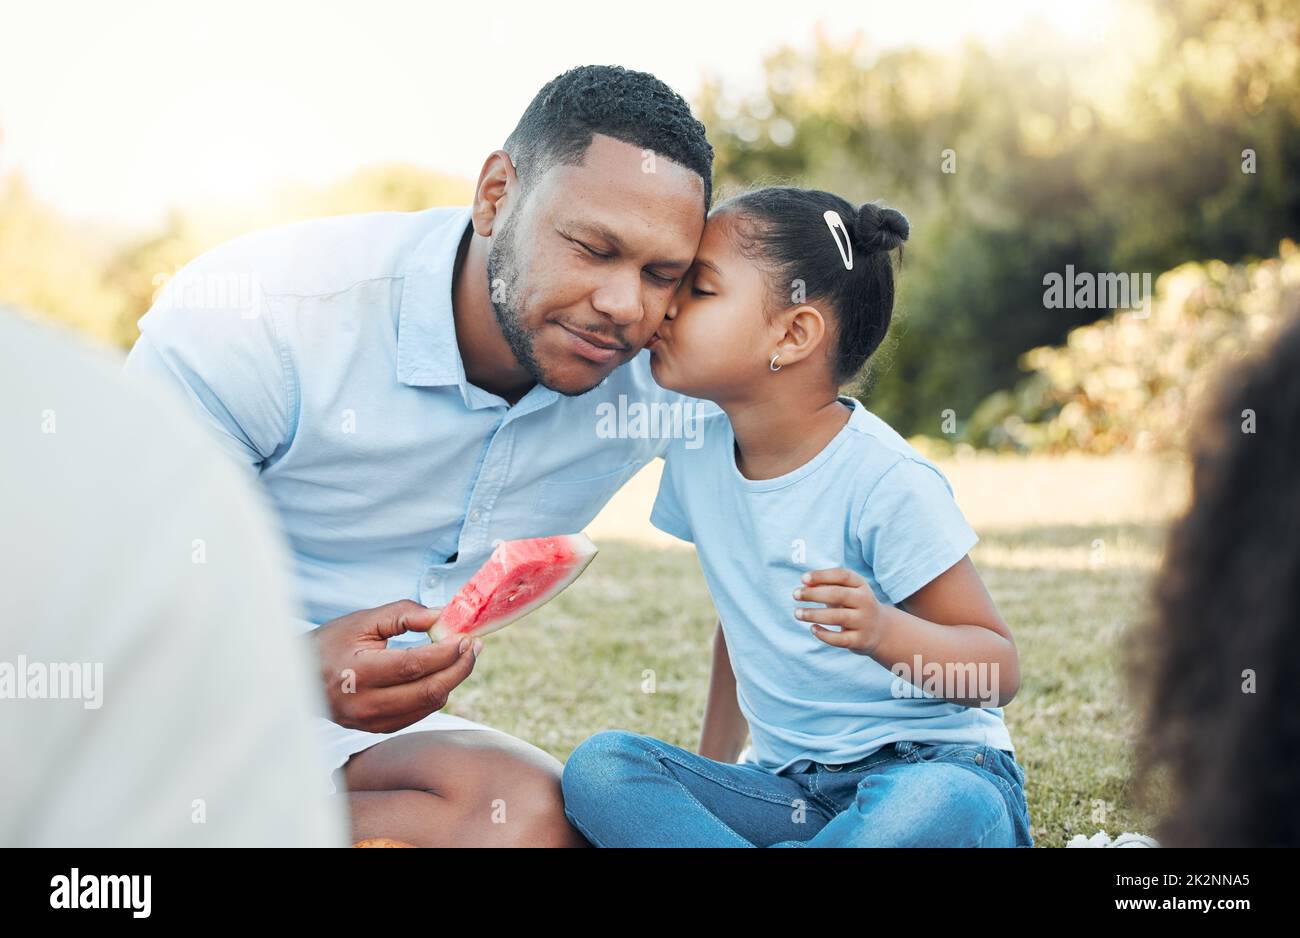 Call it a tribe, call it a family. Shot of a daughter kissing her dad at a picnic. Stock Photo